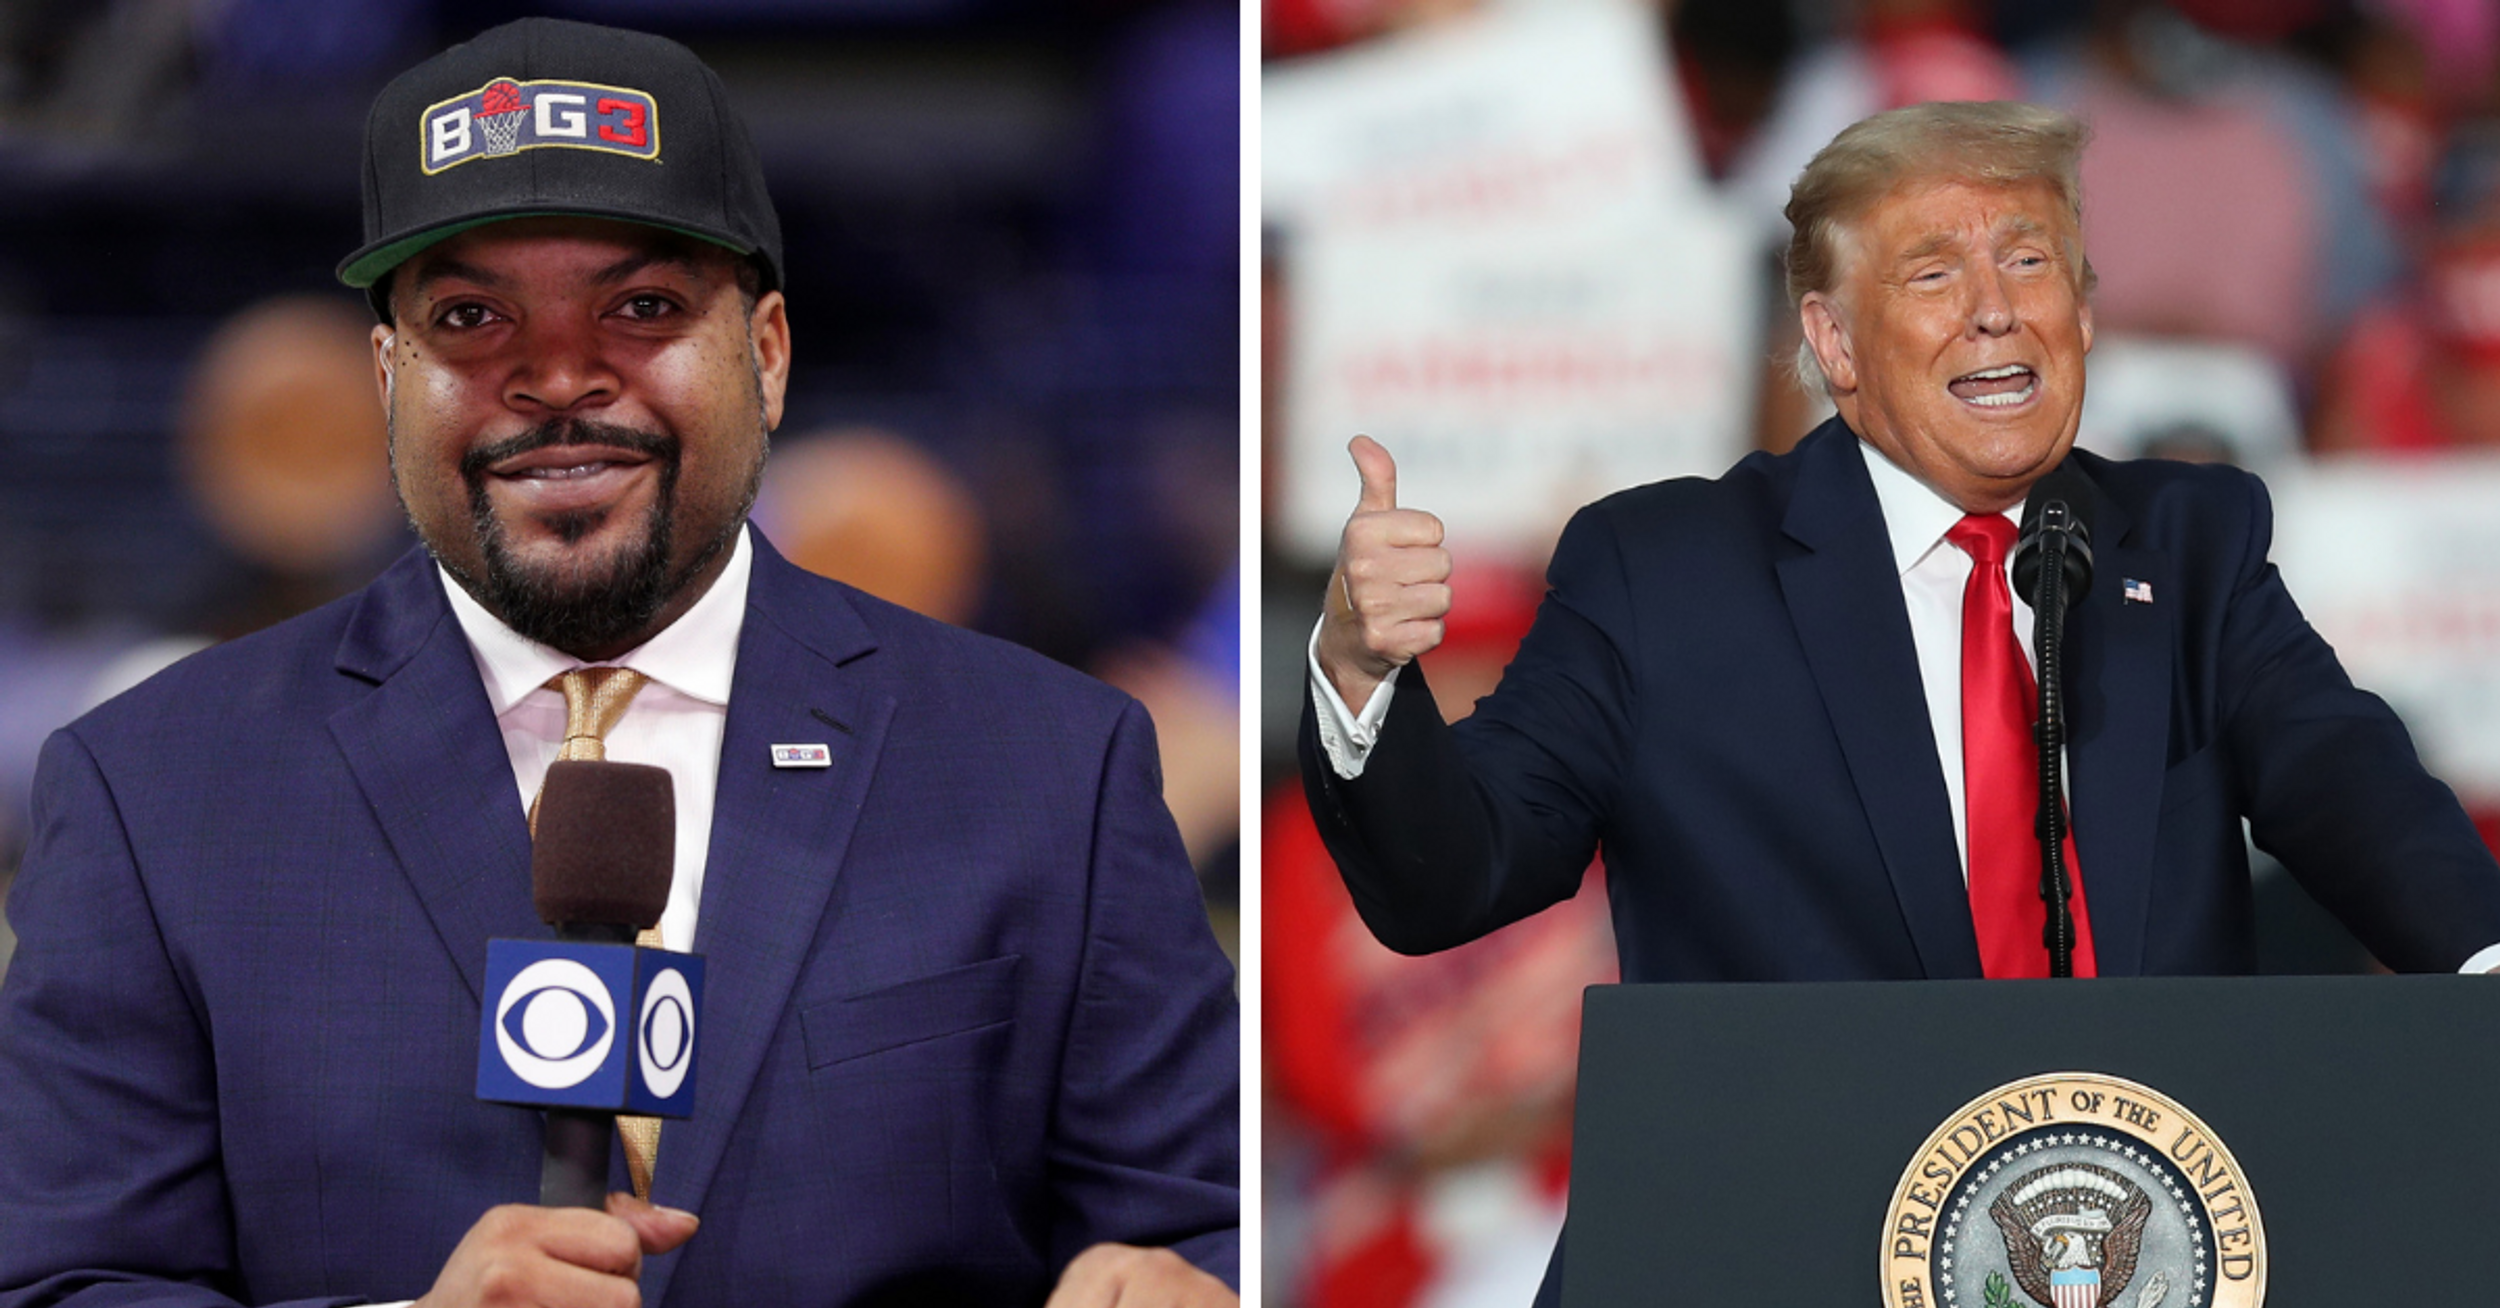 Ice Cube Hit With Backlash For Working With Trump After Previously Saying He Would 'Never Endorse' Him